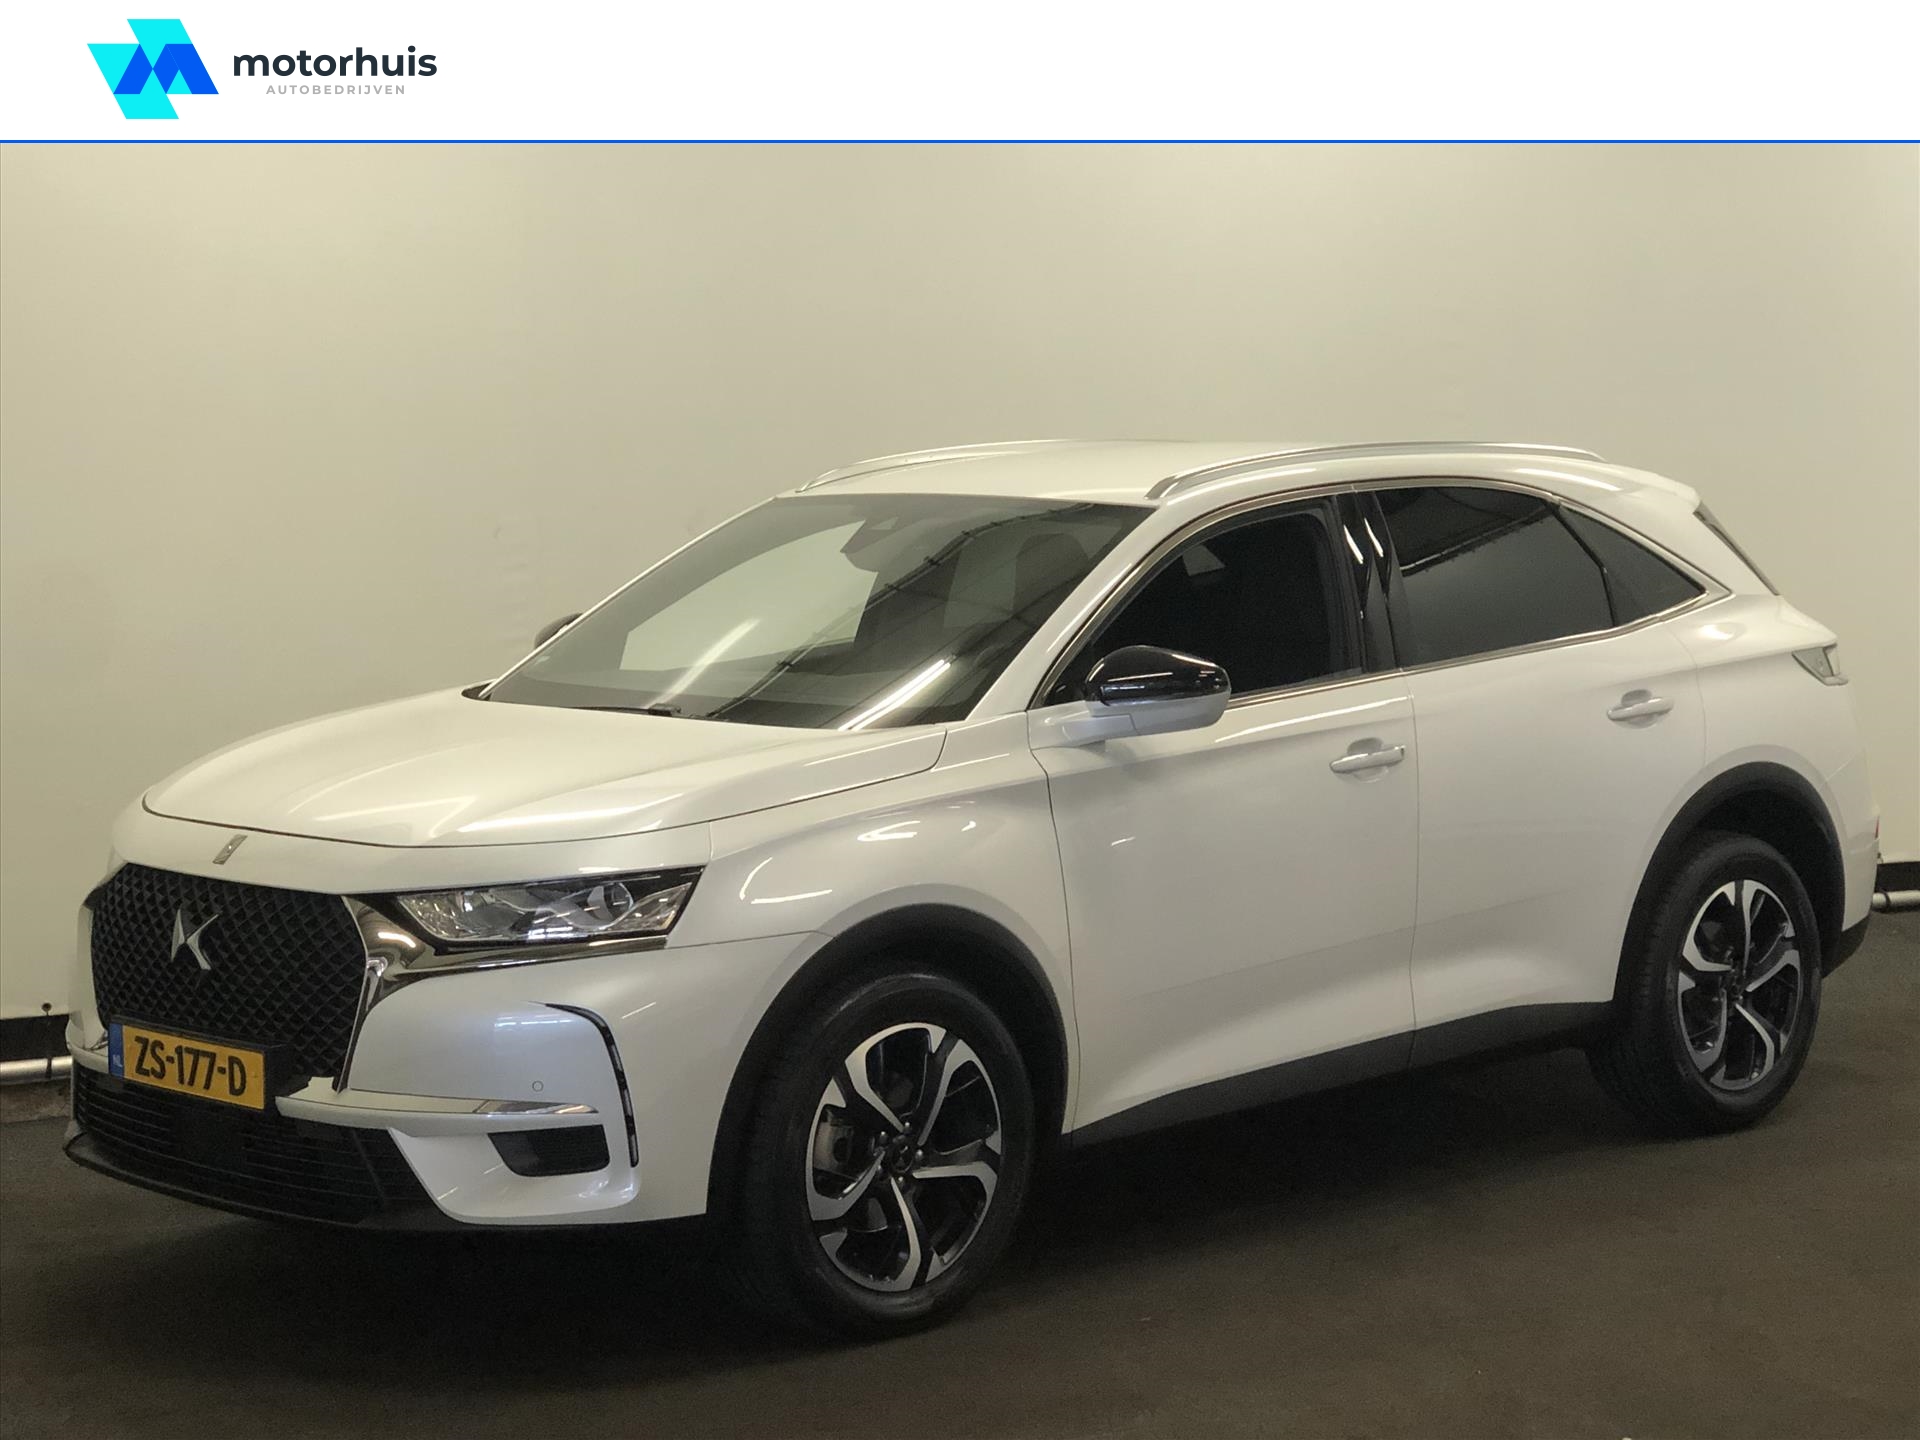 Ds Ds 7 Crossback 1.6 TURBO 180PK AUTOMAAT SO CHIC LED CAMERA NAP DAB+ bij viaBOVAG.nl